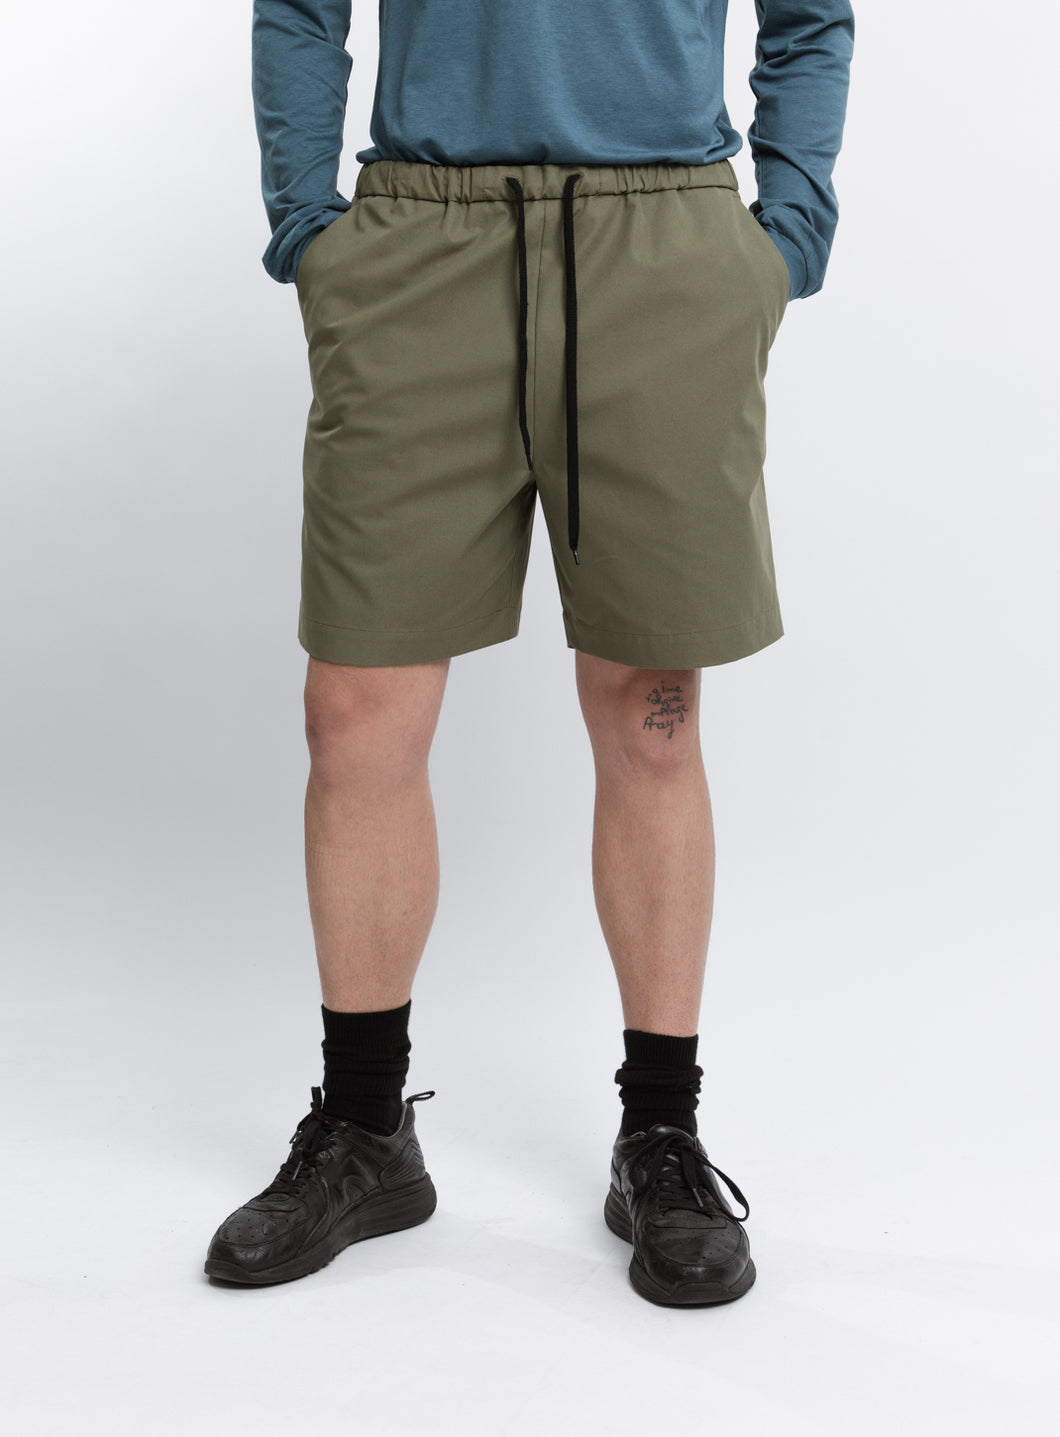 Lace Waist Bermuda Shorts in Olive Cotton Twill